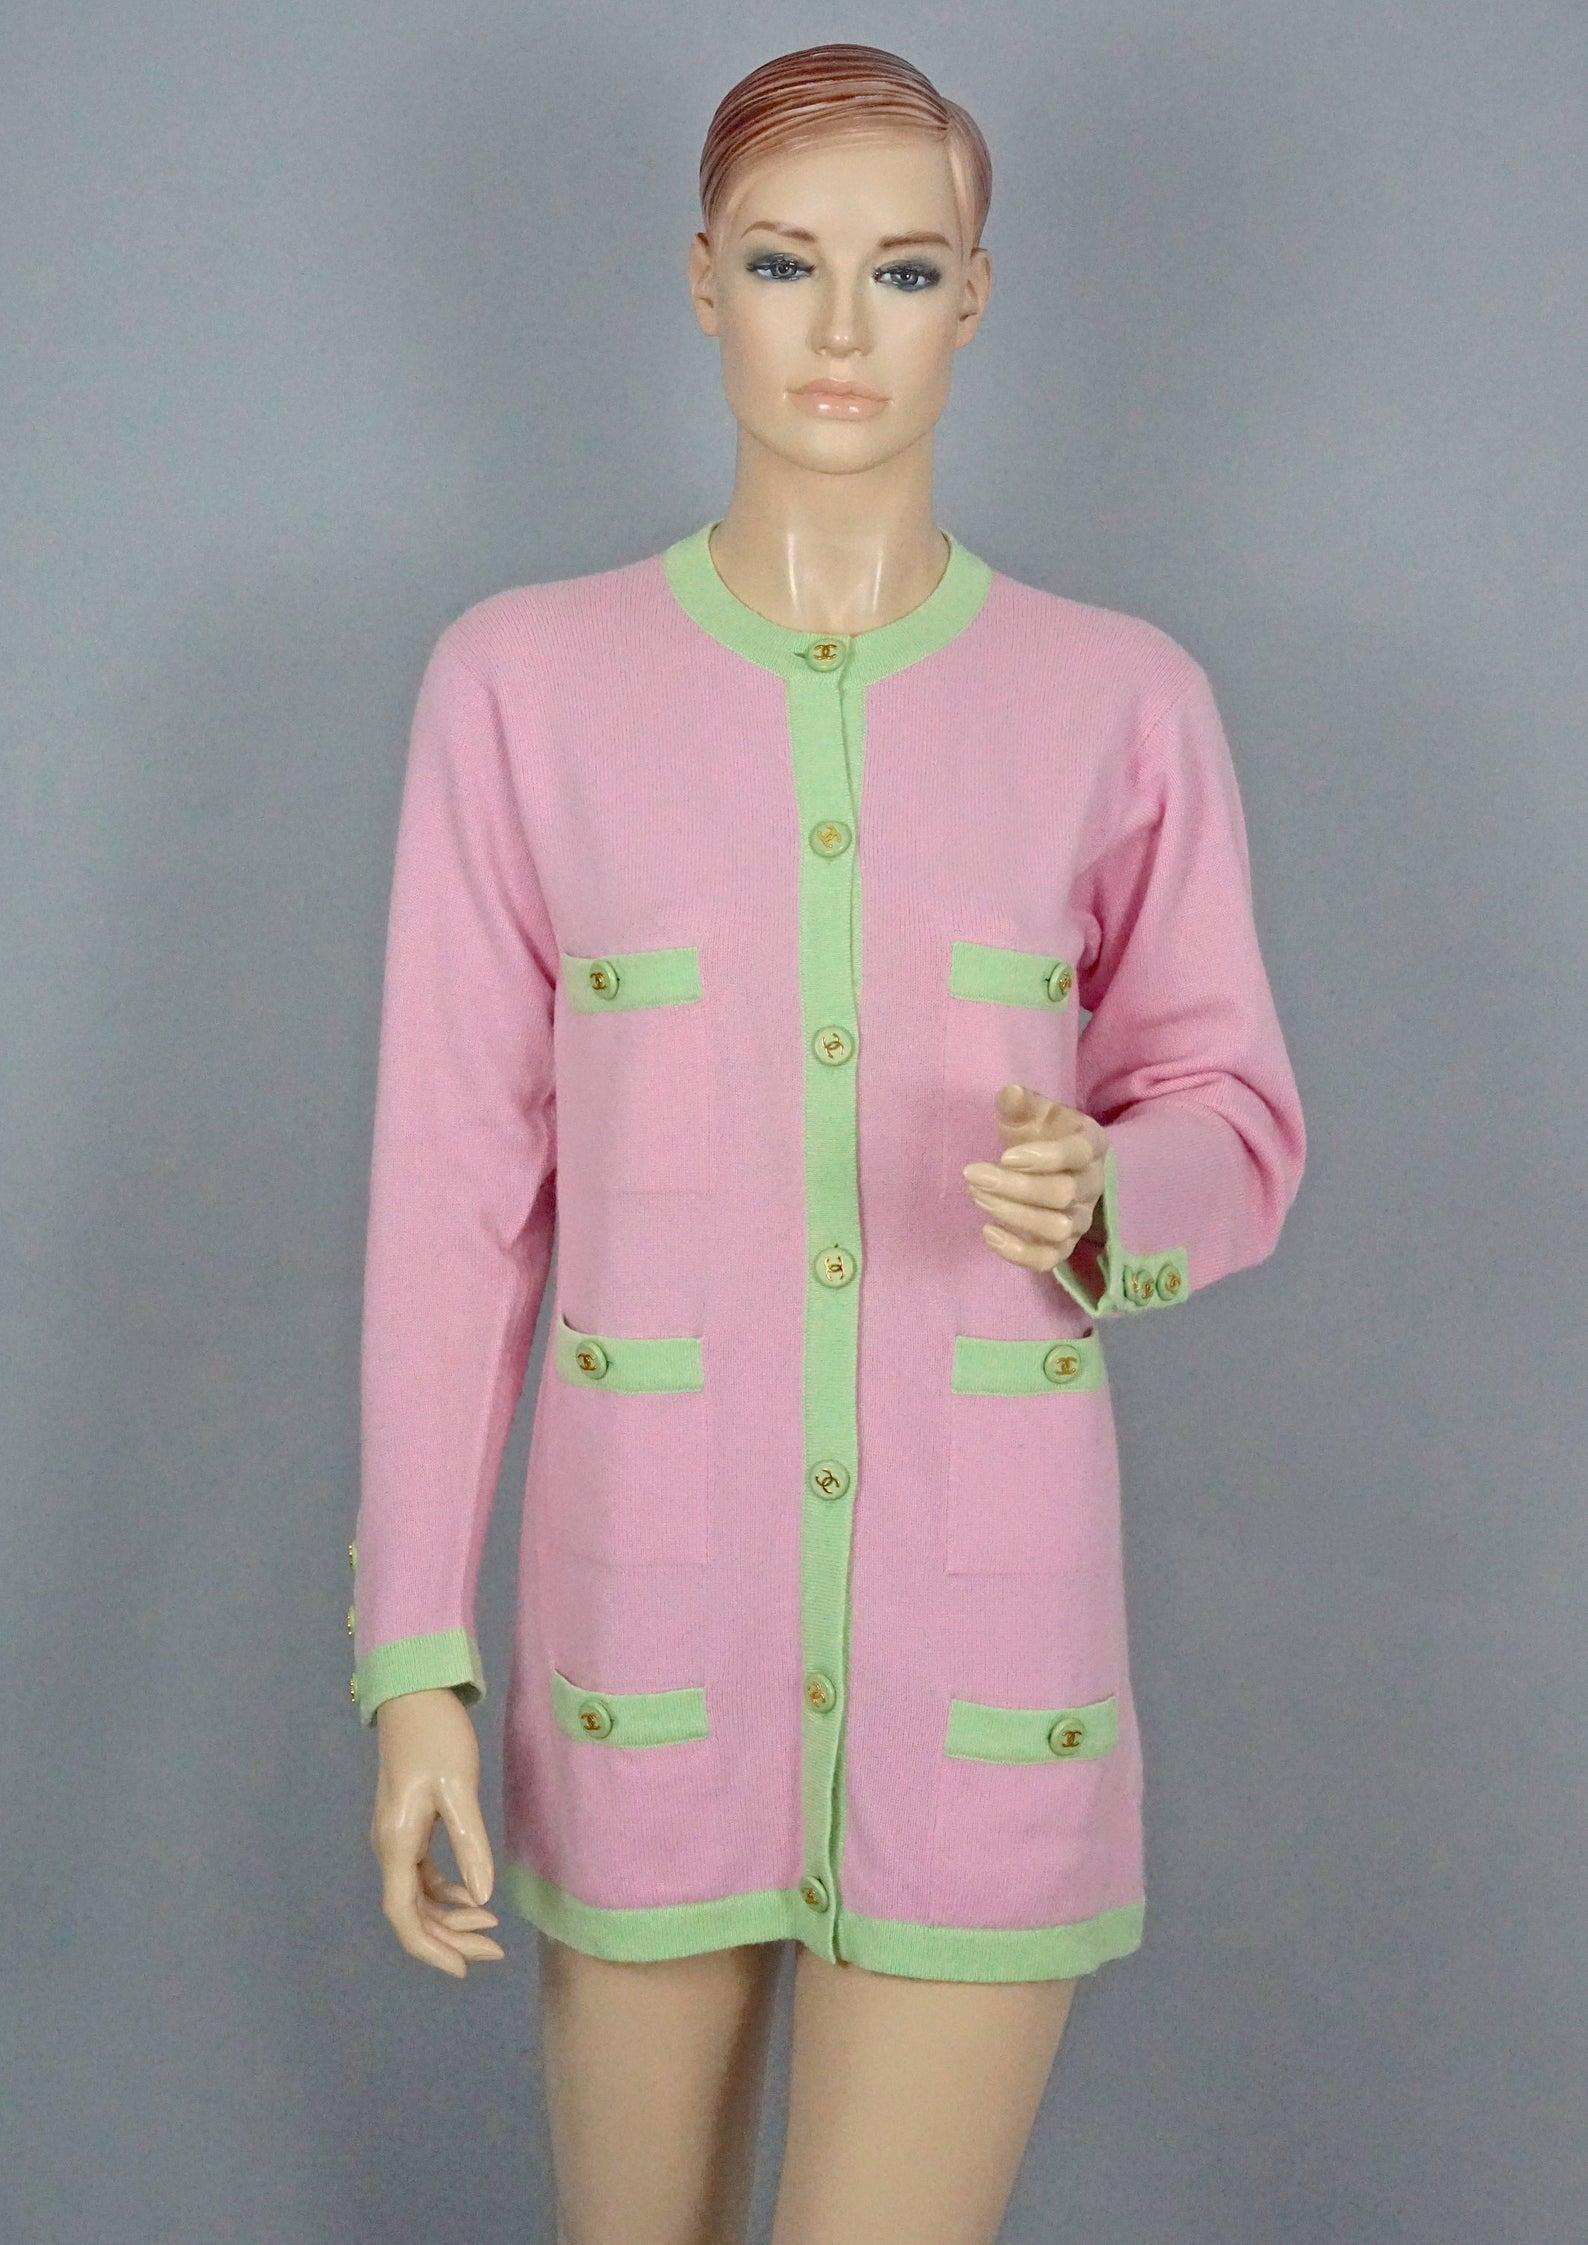 Vintage CHANEL Cashmere Knit Pink Melon Green Trim CC Logo Button Cardigan

Measurements taken laid flat, please double bust, waist and hips:
Shoulder: 17.12 inches (43.5 cm)
Sleeves: 22.63 inches (57.5 cm)
Bust: 18.11 inches (46 cm)
Waist: 17.71